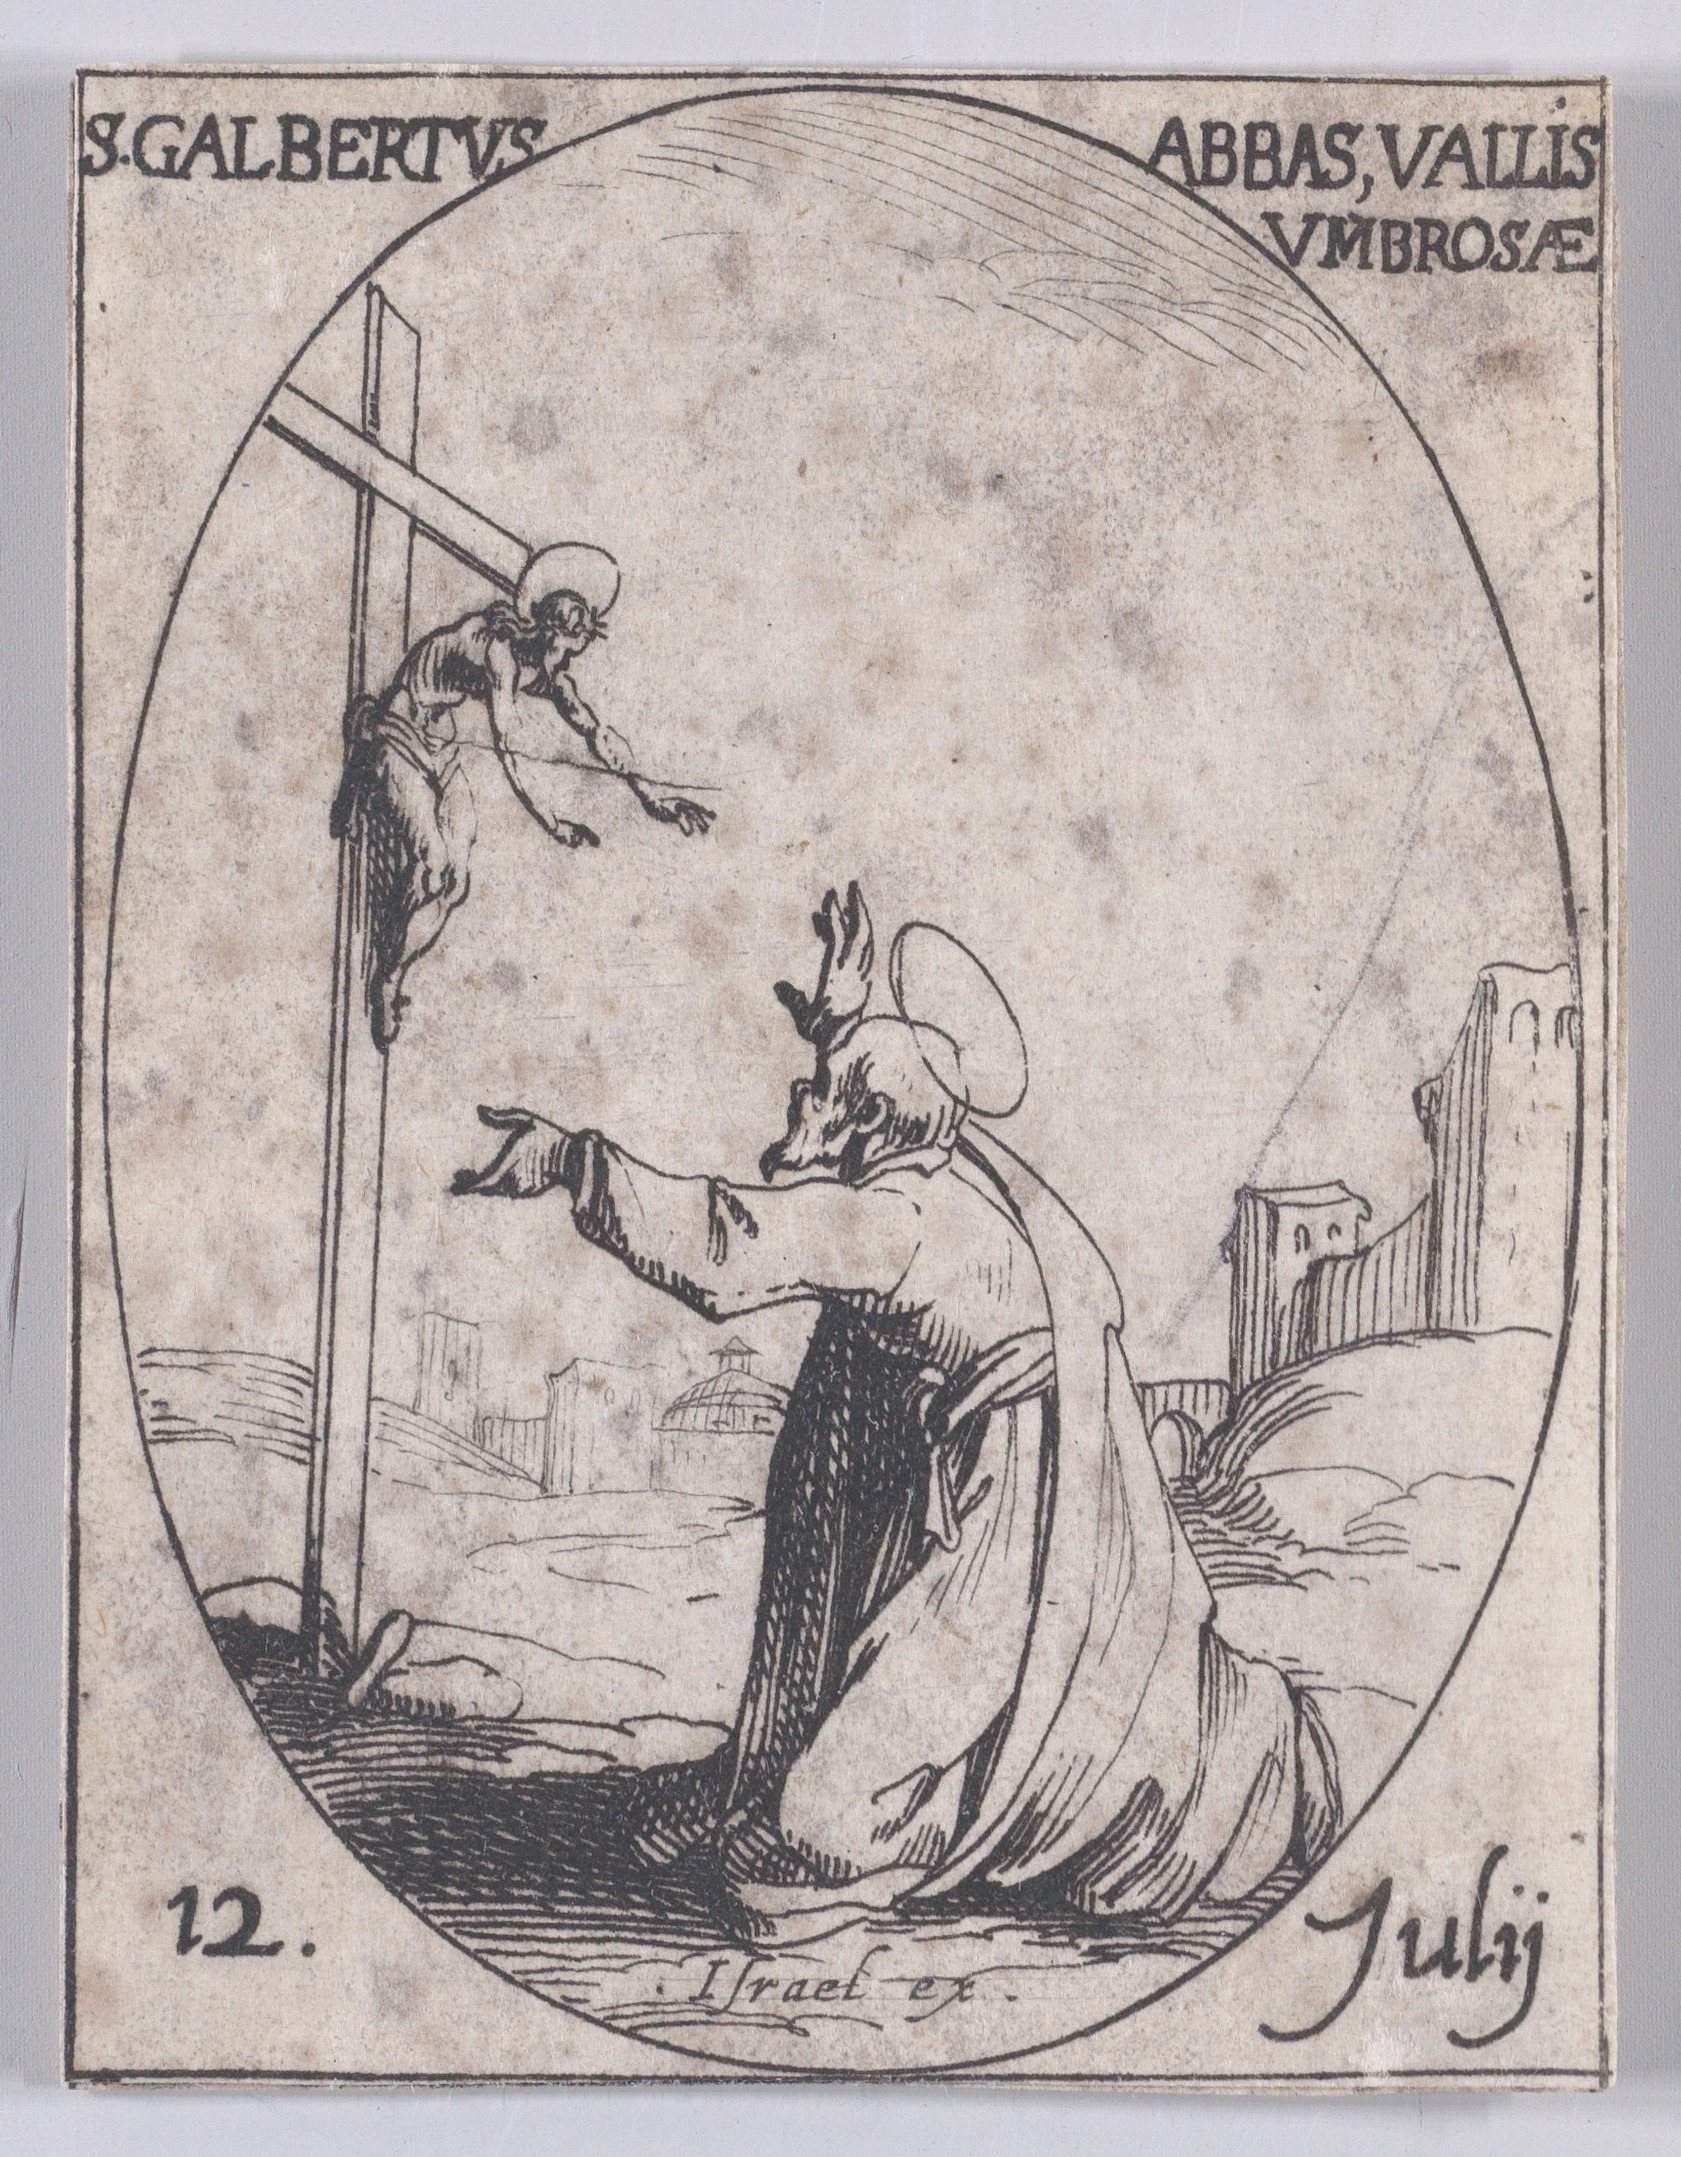 S. Galbert, abbé du Val d'Ombrose (St. John Gualbert, Abbot of Val d'Ombrose), July 12th, from Les Images De Tous Les Saincts et Saintes de L'Année (Images of All of the Saints and Religious Events of the Year), Jacques Callot (French, Nancy 1592–1635 Nancy), Etching; second state of two (Lieure)